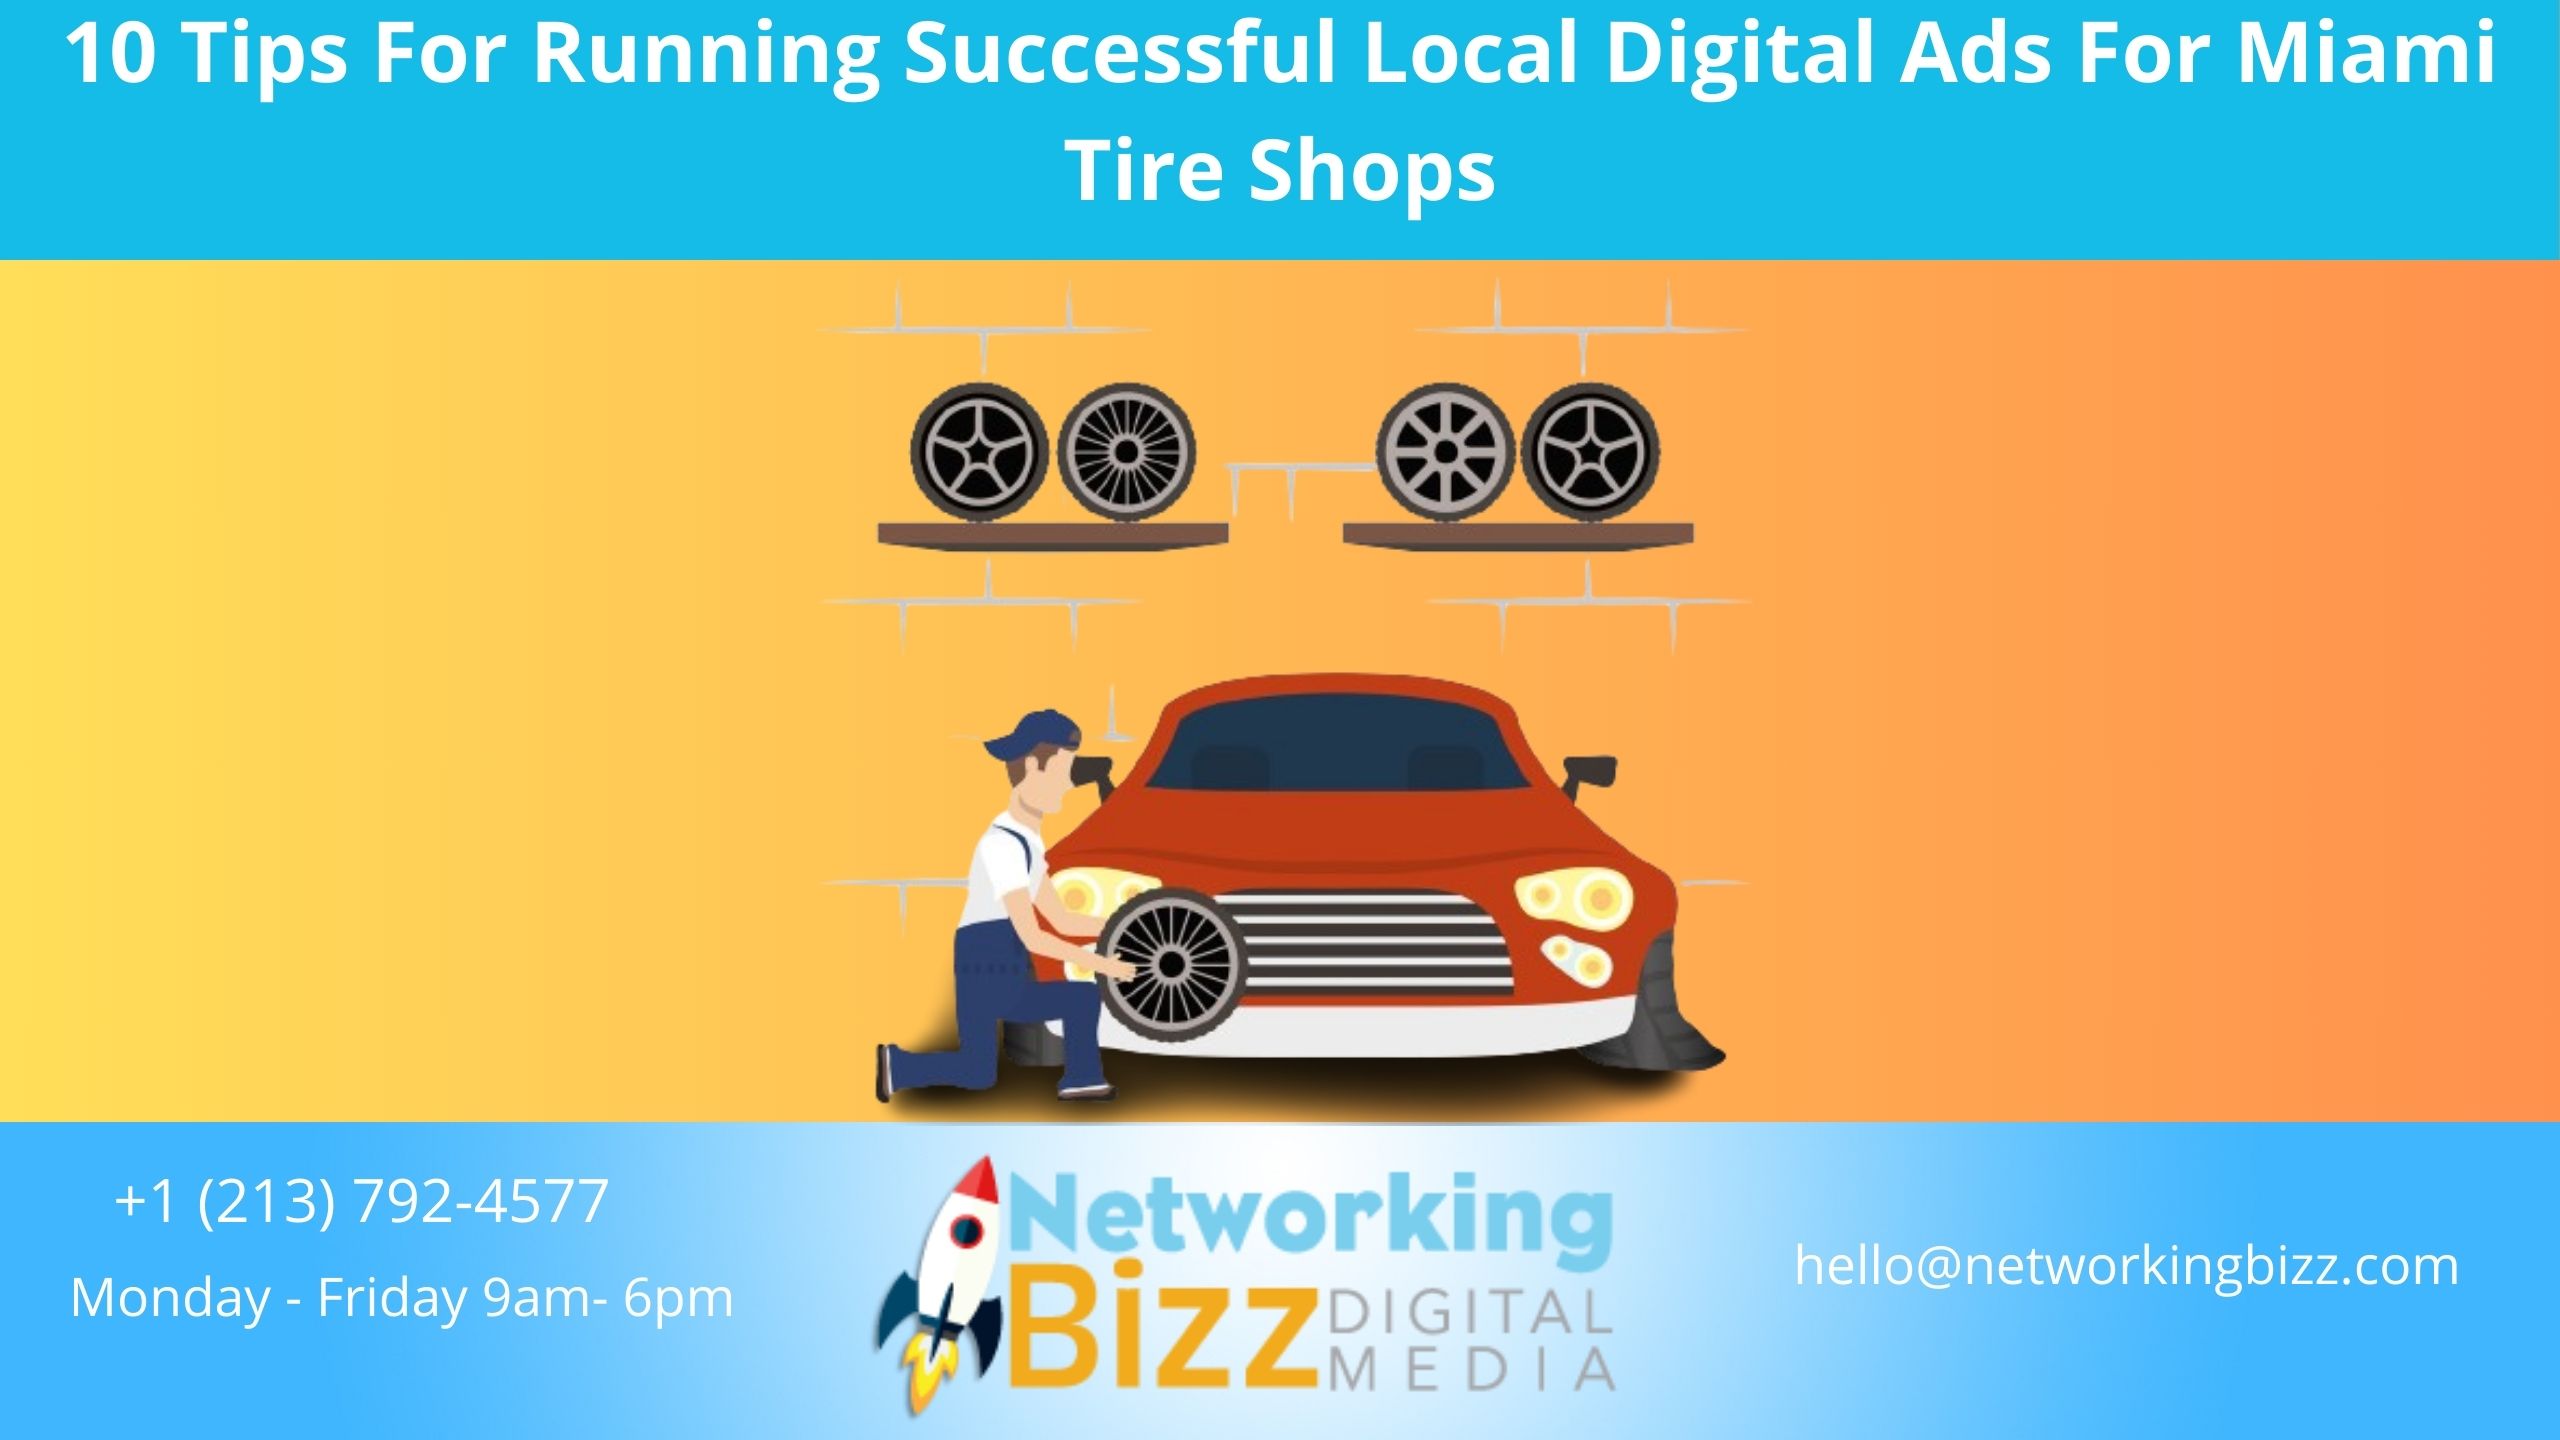 10 Tips For Running Successful Local Digital Ads For Miami Tire Shops